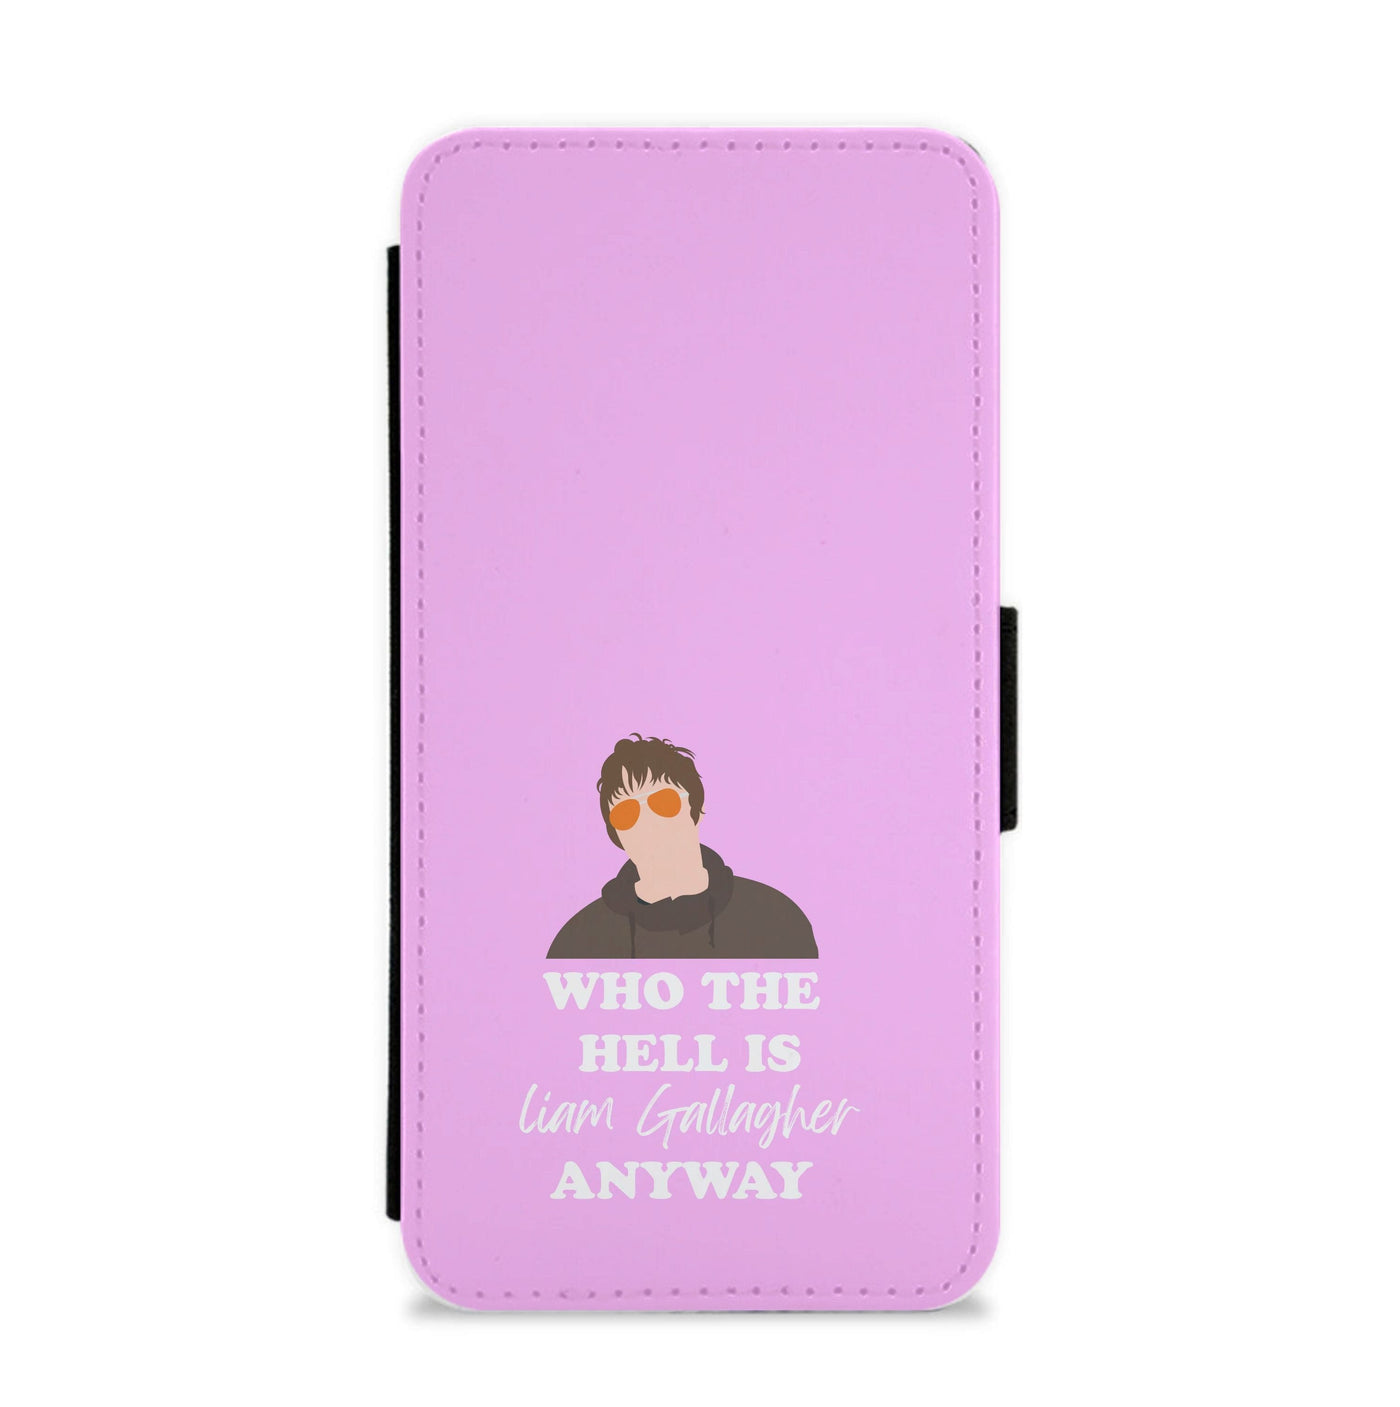 Who The Hell Is Liam Gallagher anyway - Festival Flip / Wallet Phone Case